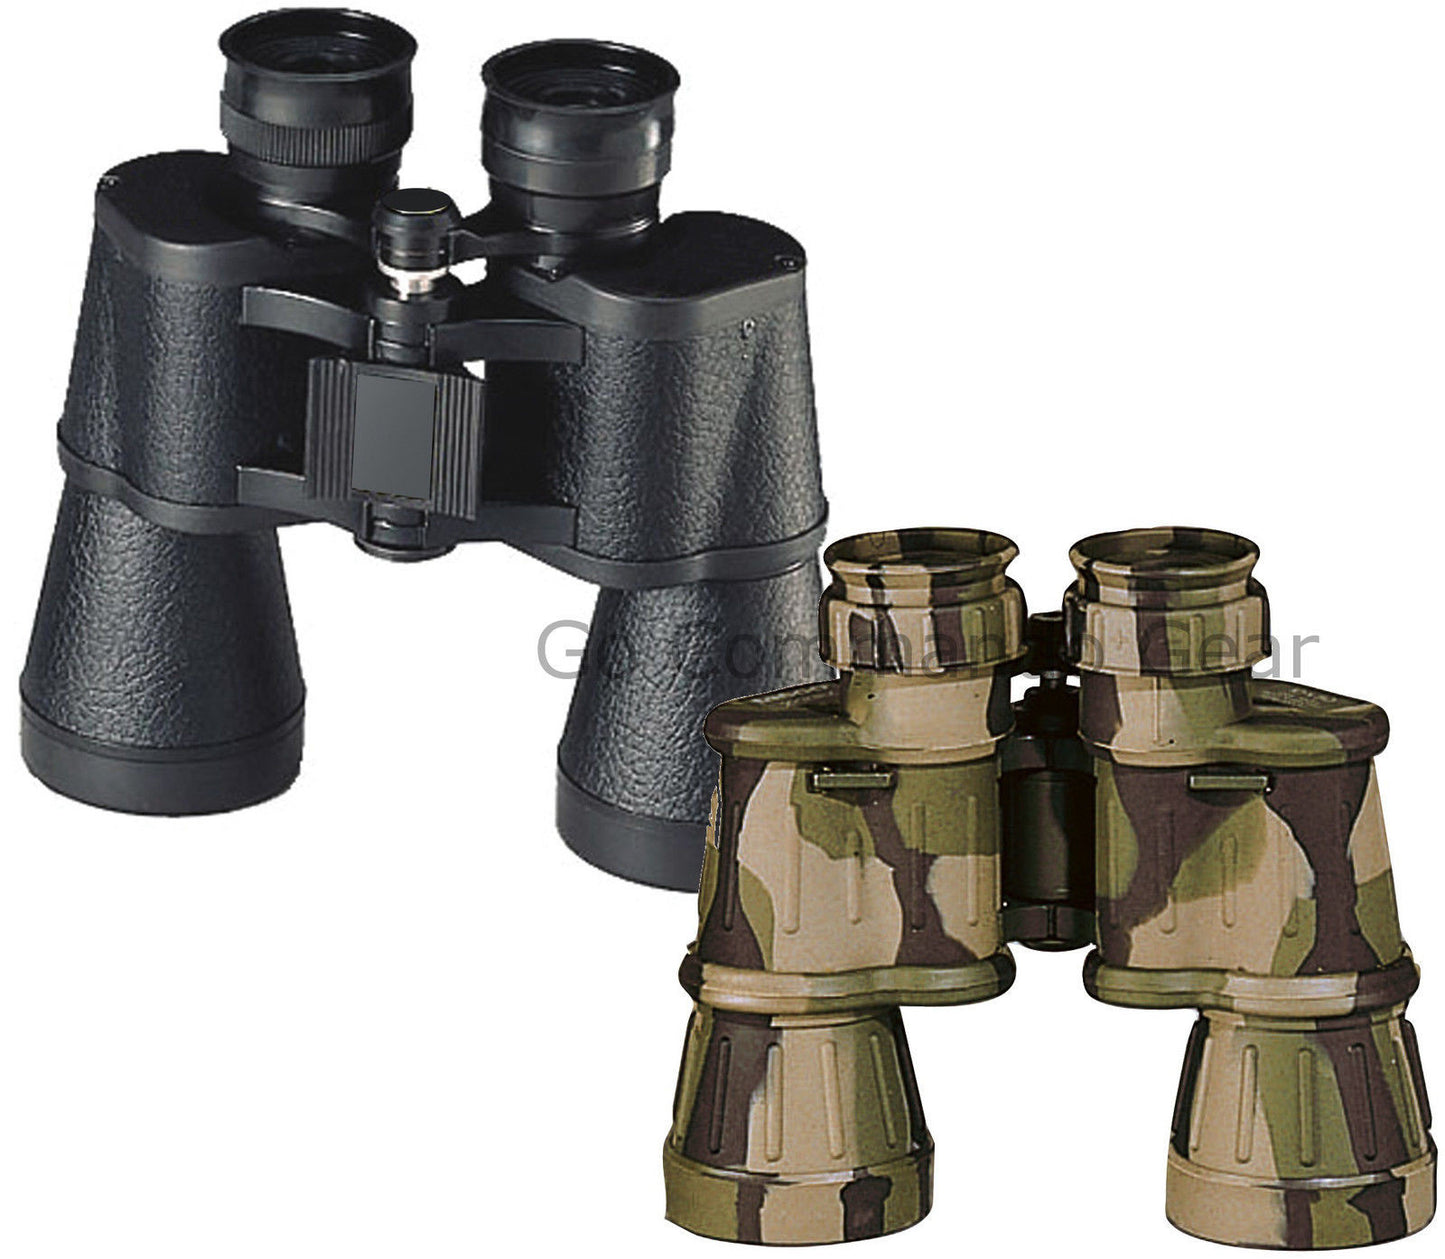 Full Size Camo Or Black Binoculars With Case - 10 x 50 MM - 10X Magnification